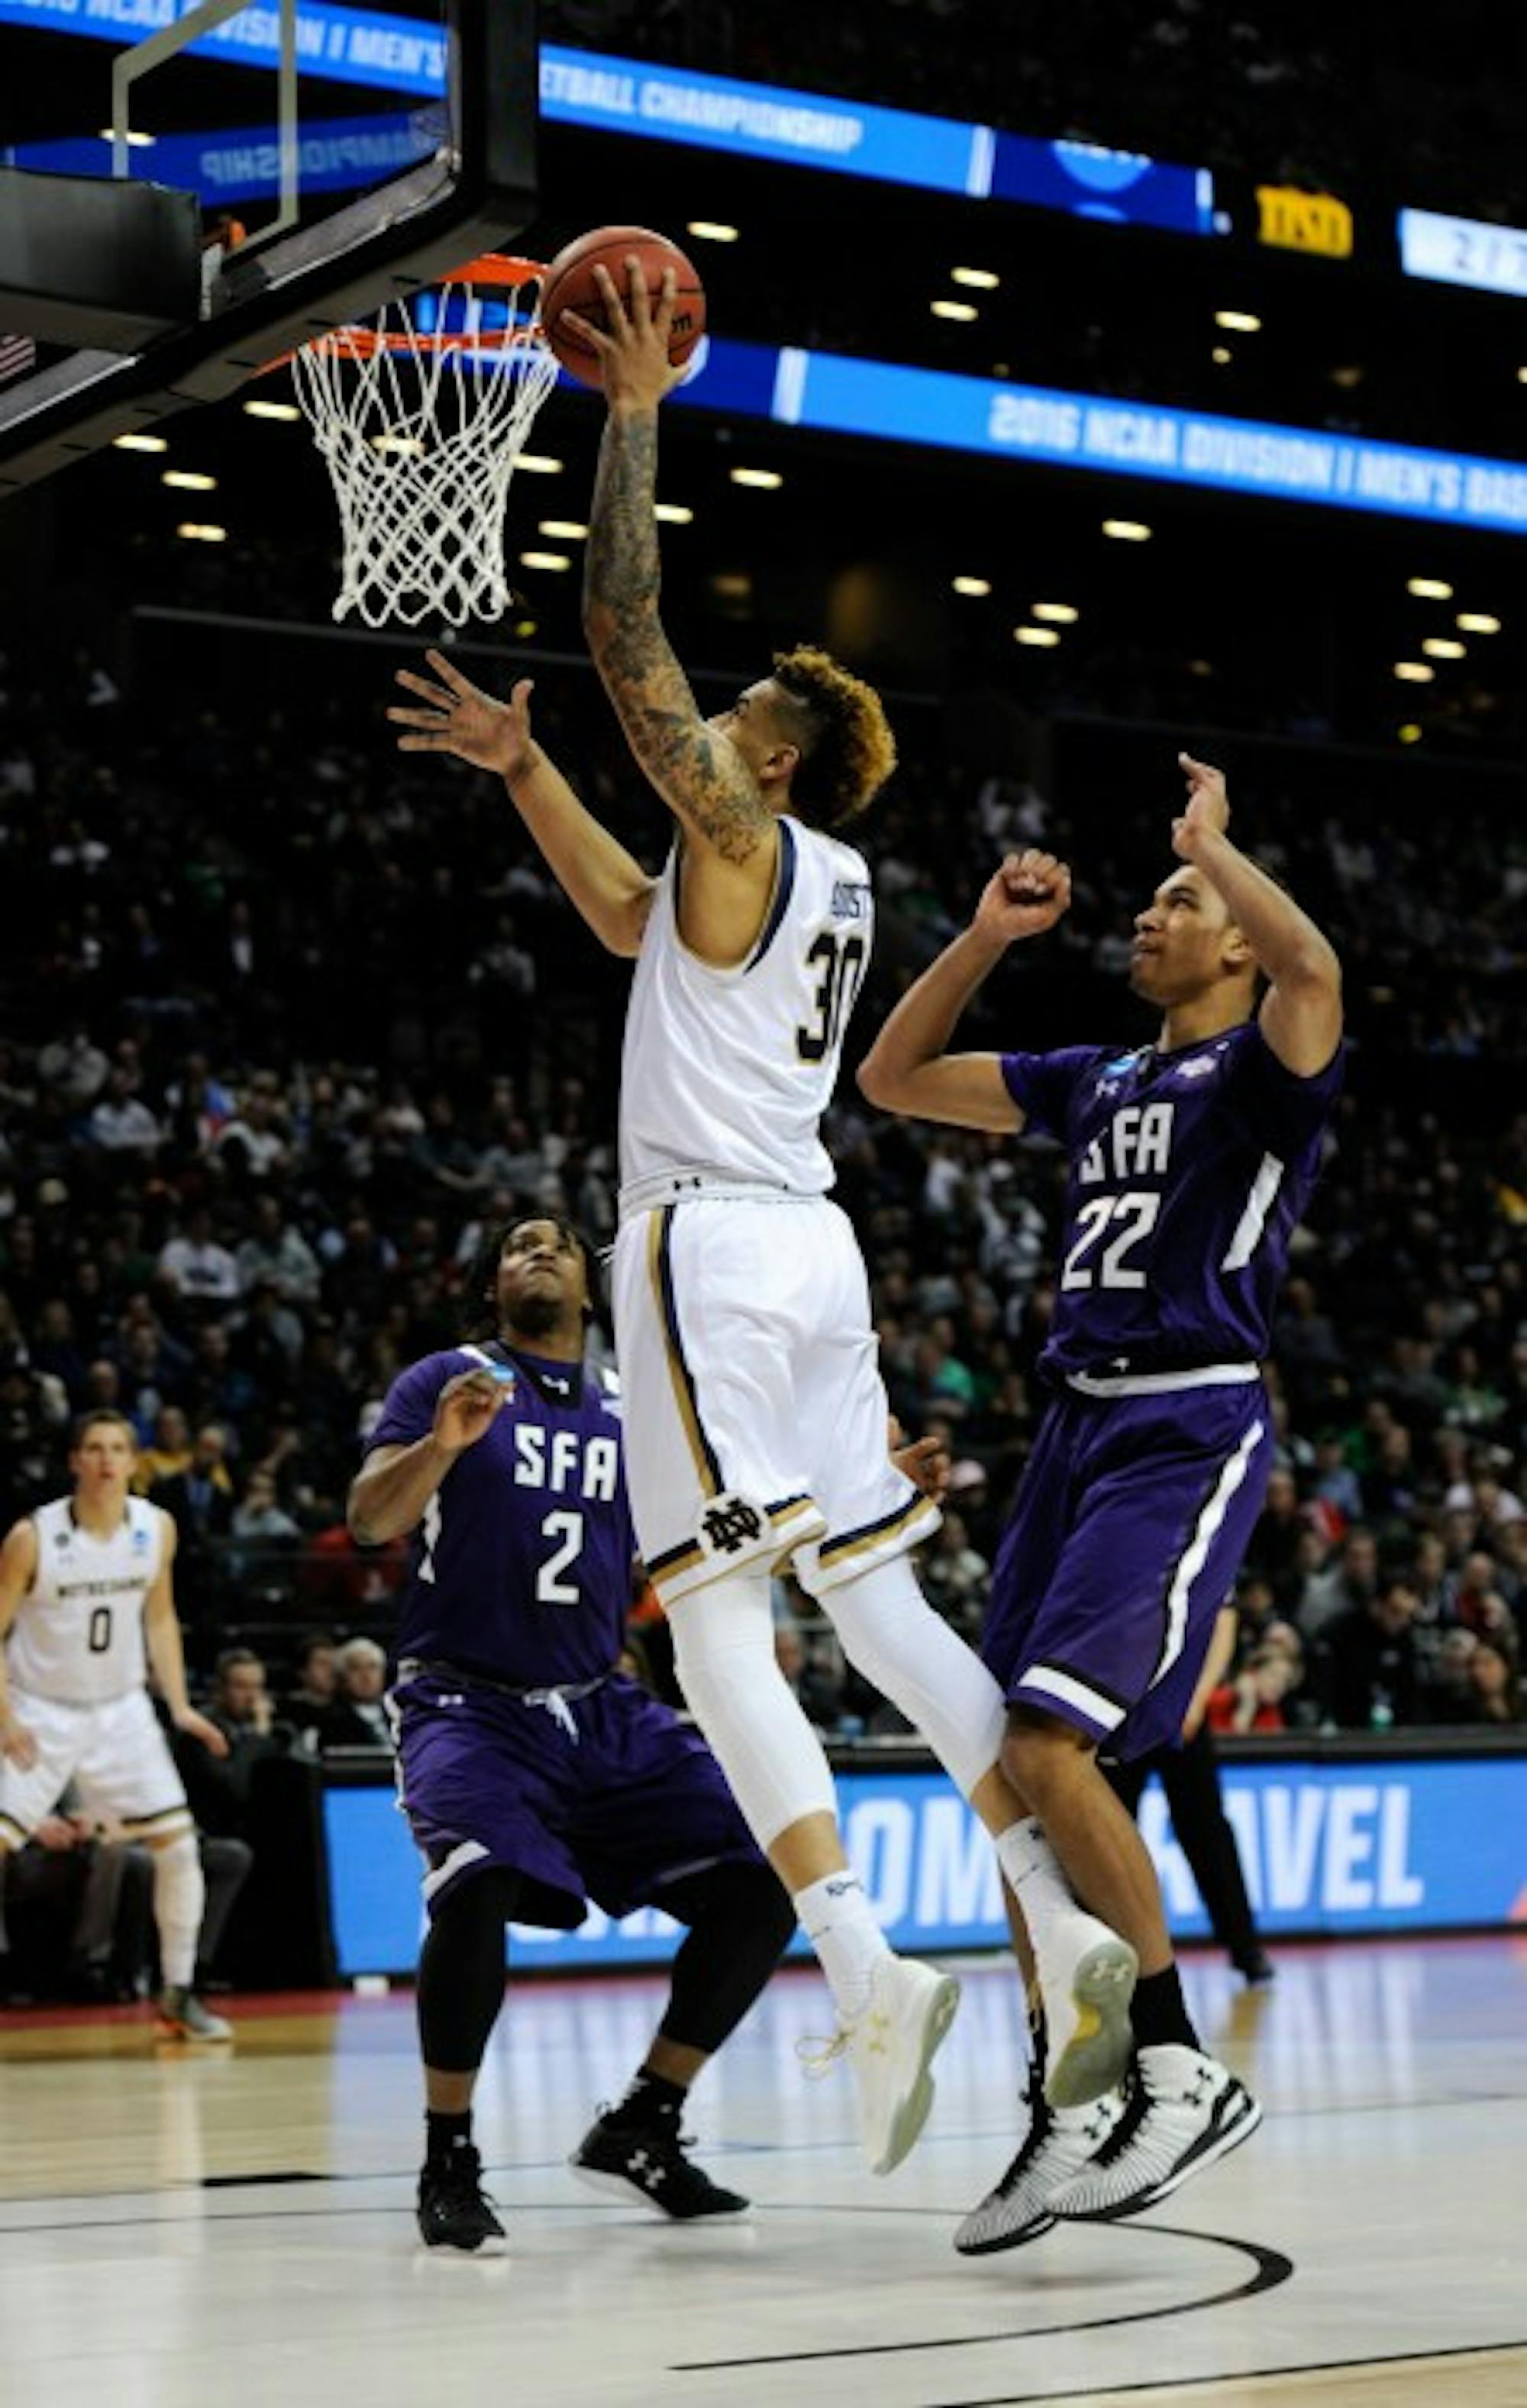 Irish senior forward Zach Auguste scores a layup during Notre Dame’s second-round win over Stephen F. Austin on Sunday in Brooklyn, N.Y.